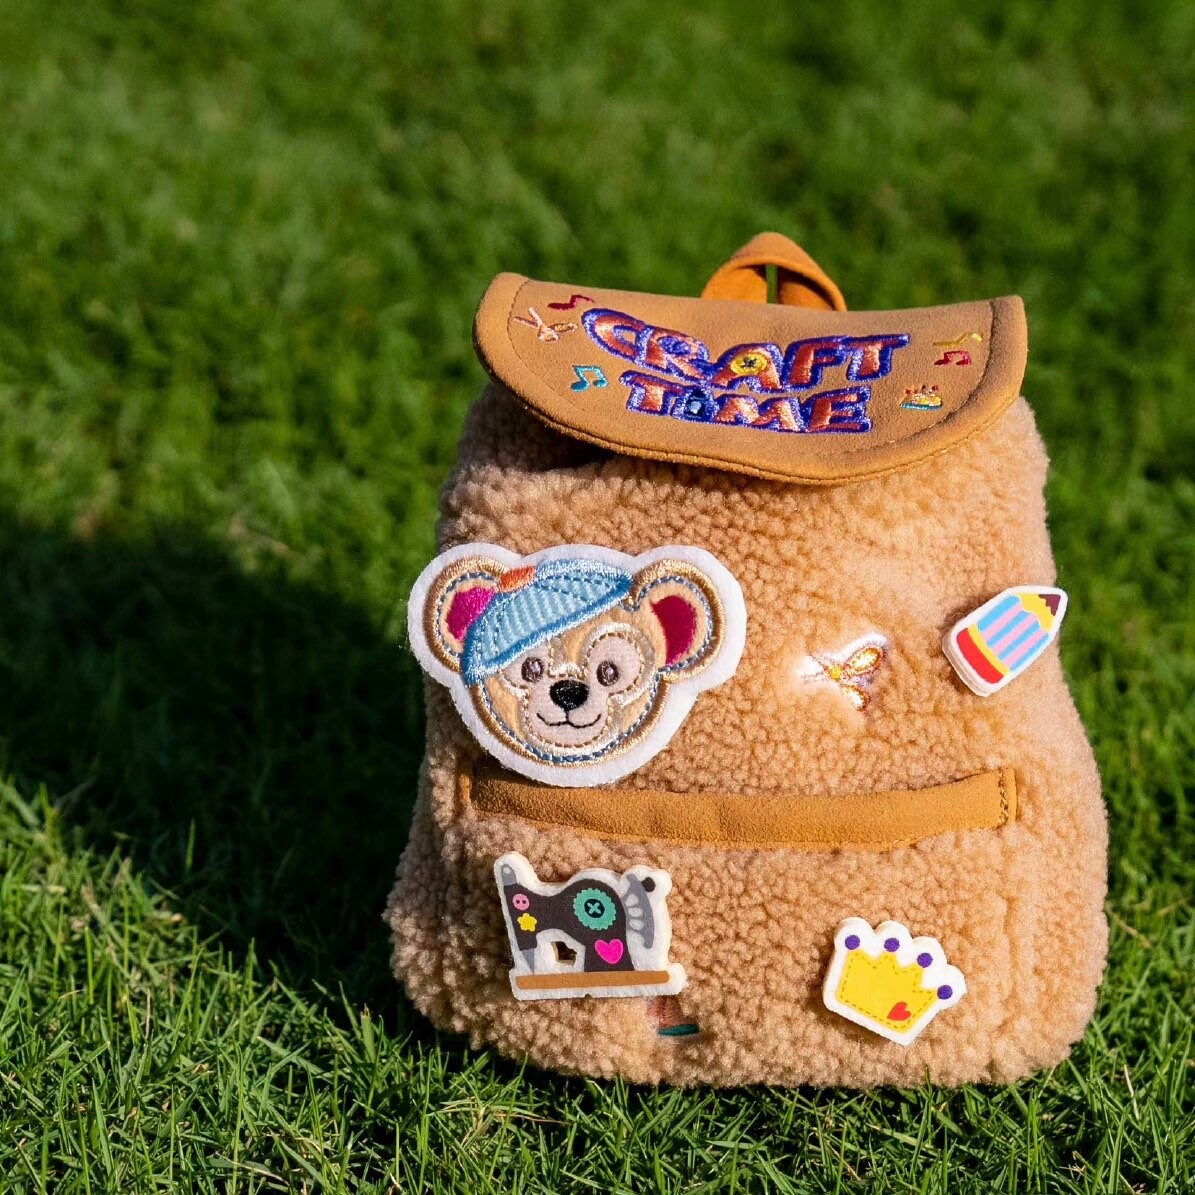 Shanghai Disneyland 「Duffy and friends」Craft time series small backpack bag for doll